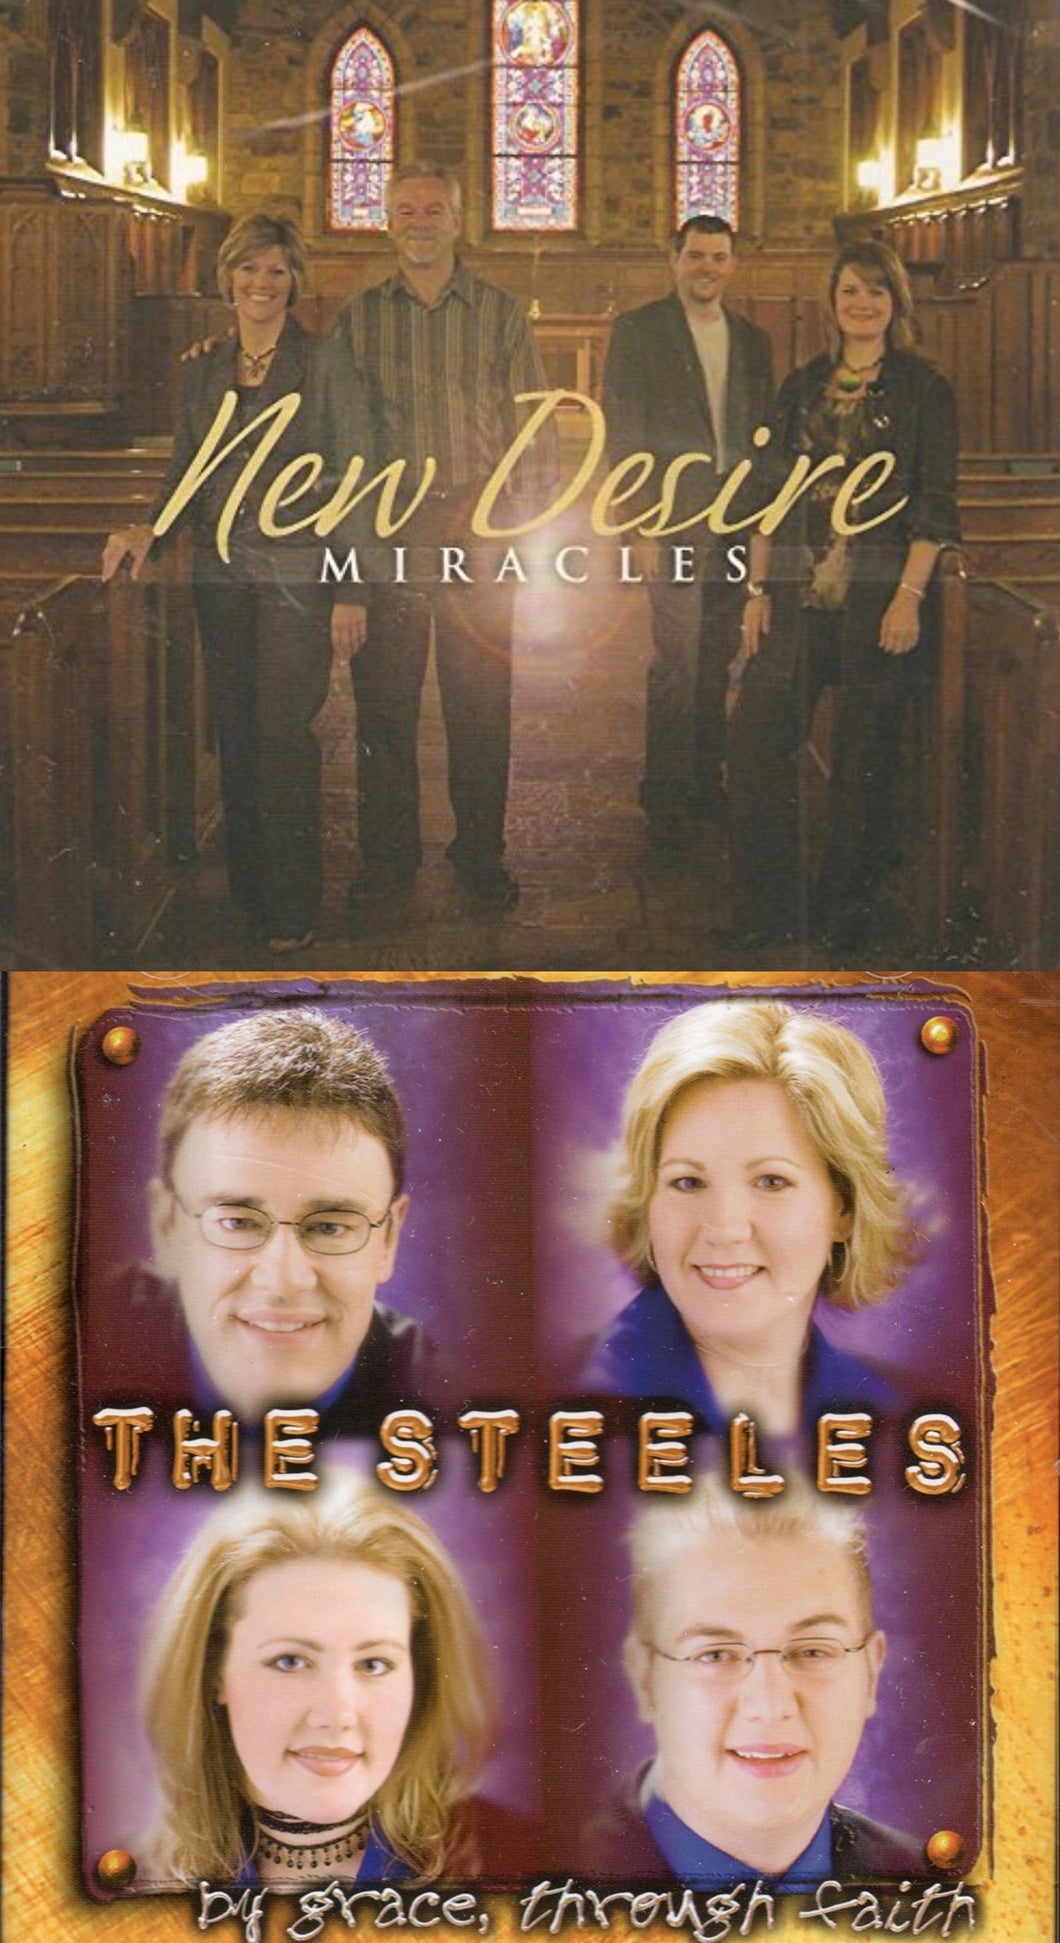 New Desire Miracles + The Steeles By Grace Through Fatih 2CD